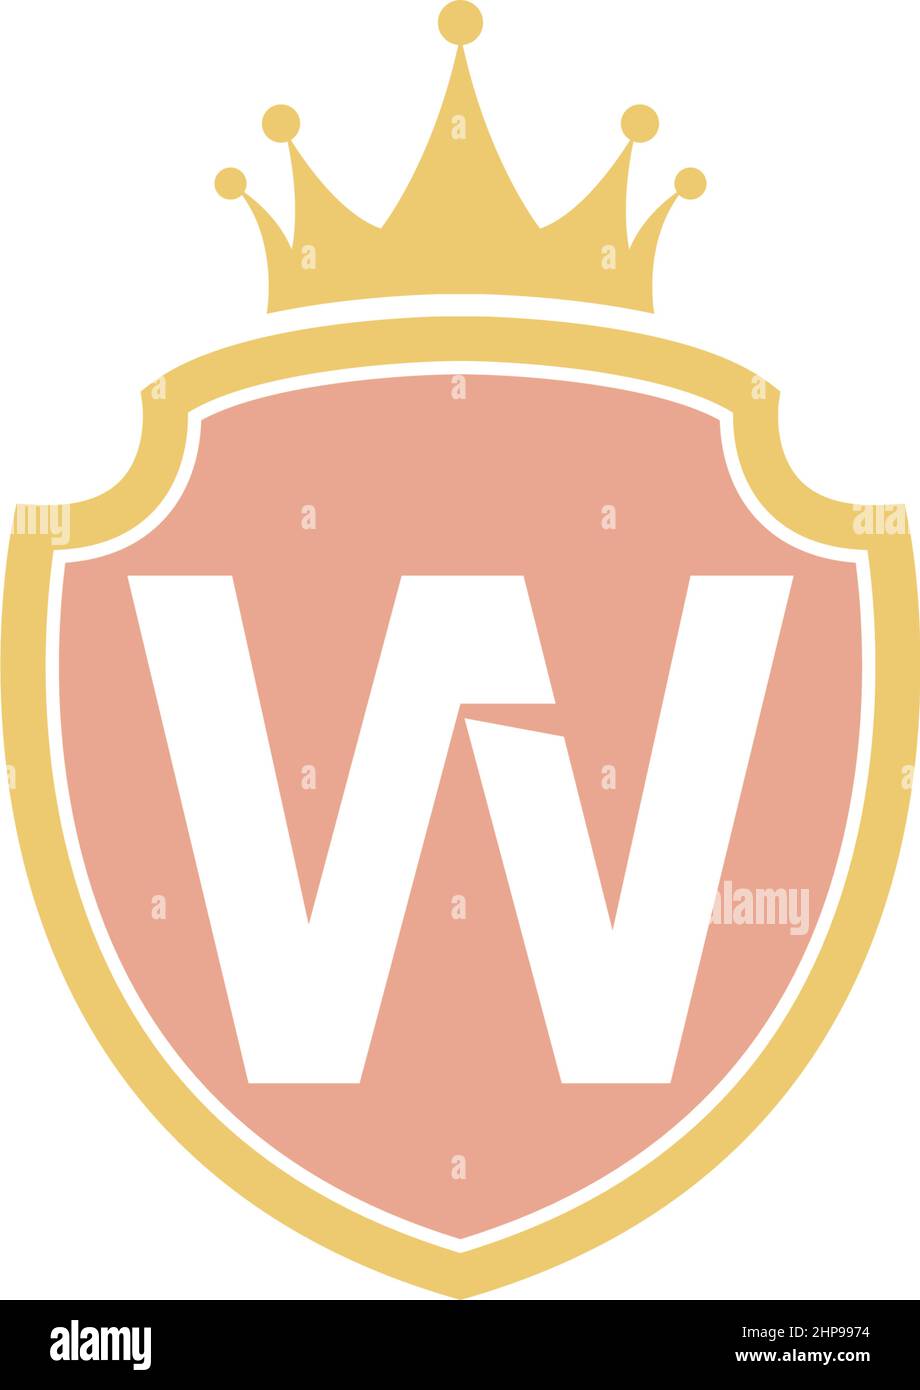 W Letter Logo Consisting Of Floral Pattern Letters In A Heraldic Shield  With Crown Stock Illustration - Download Image Now - iStock